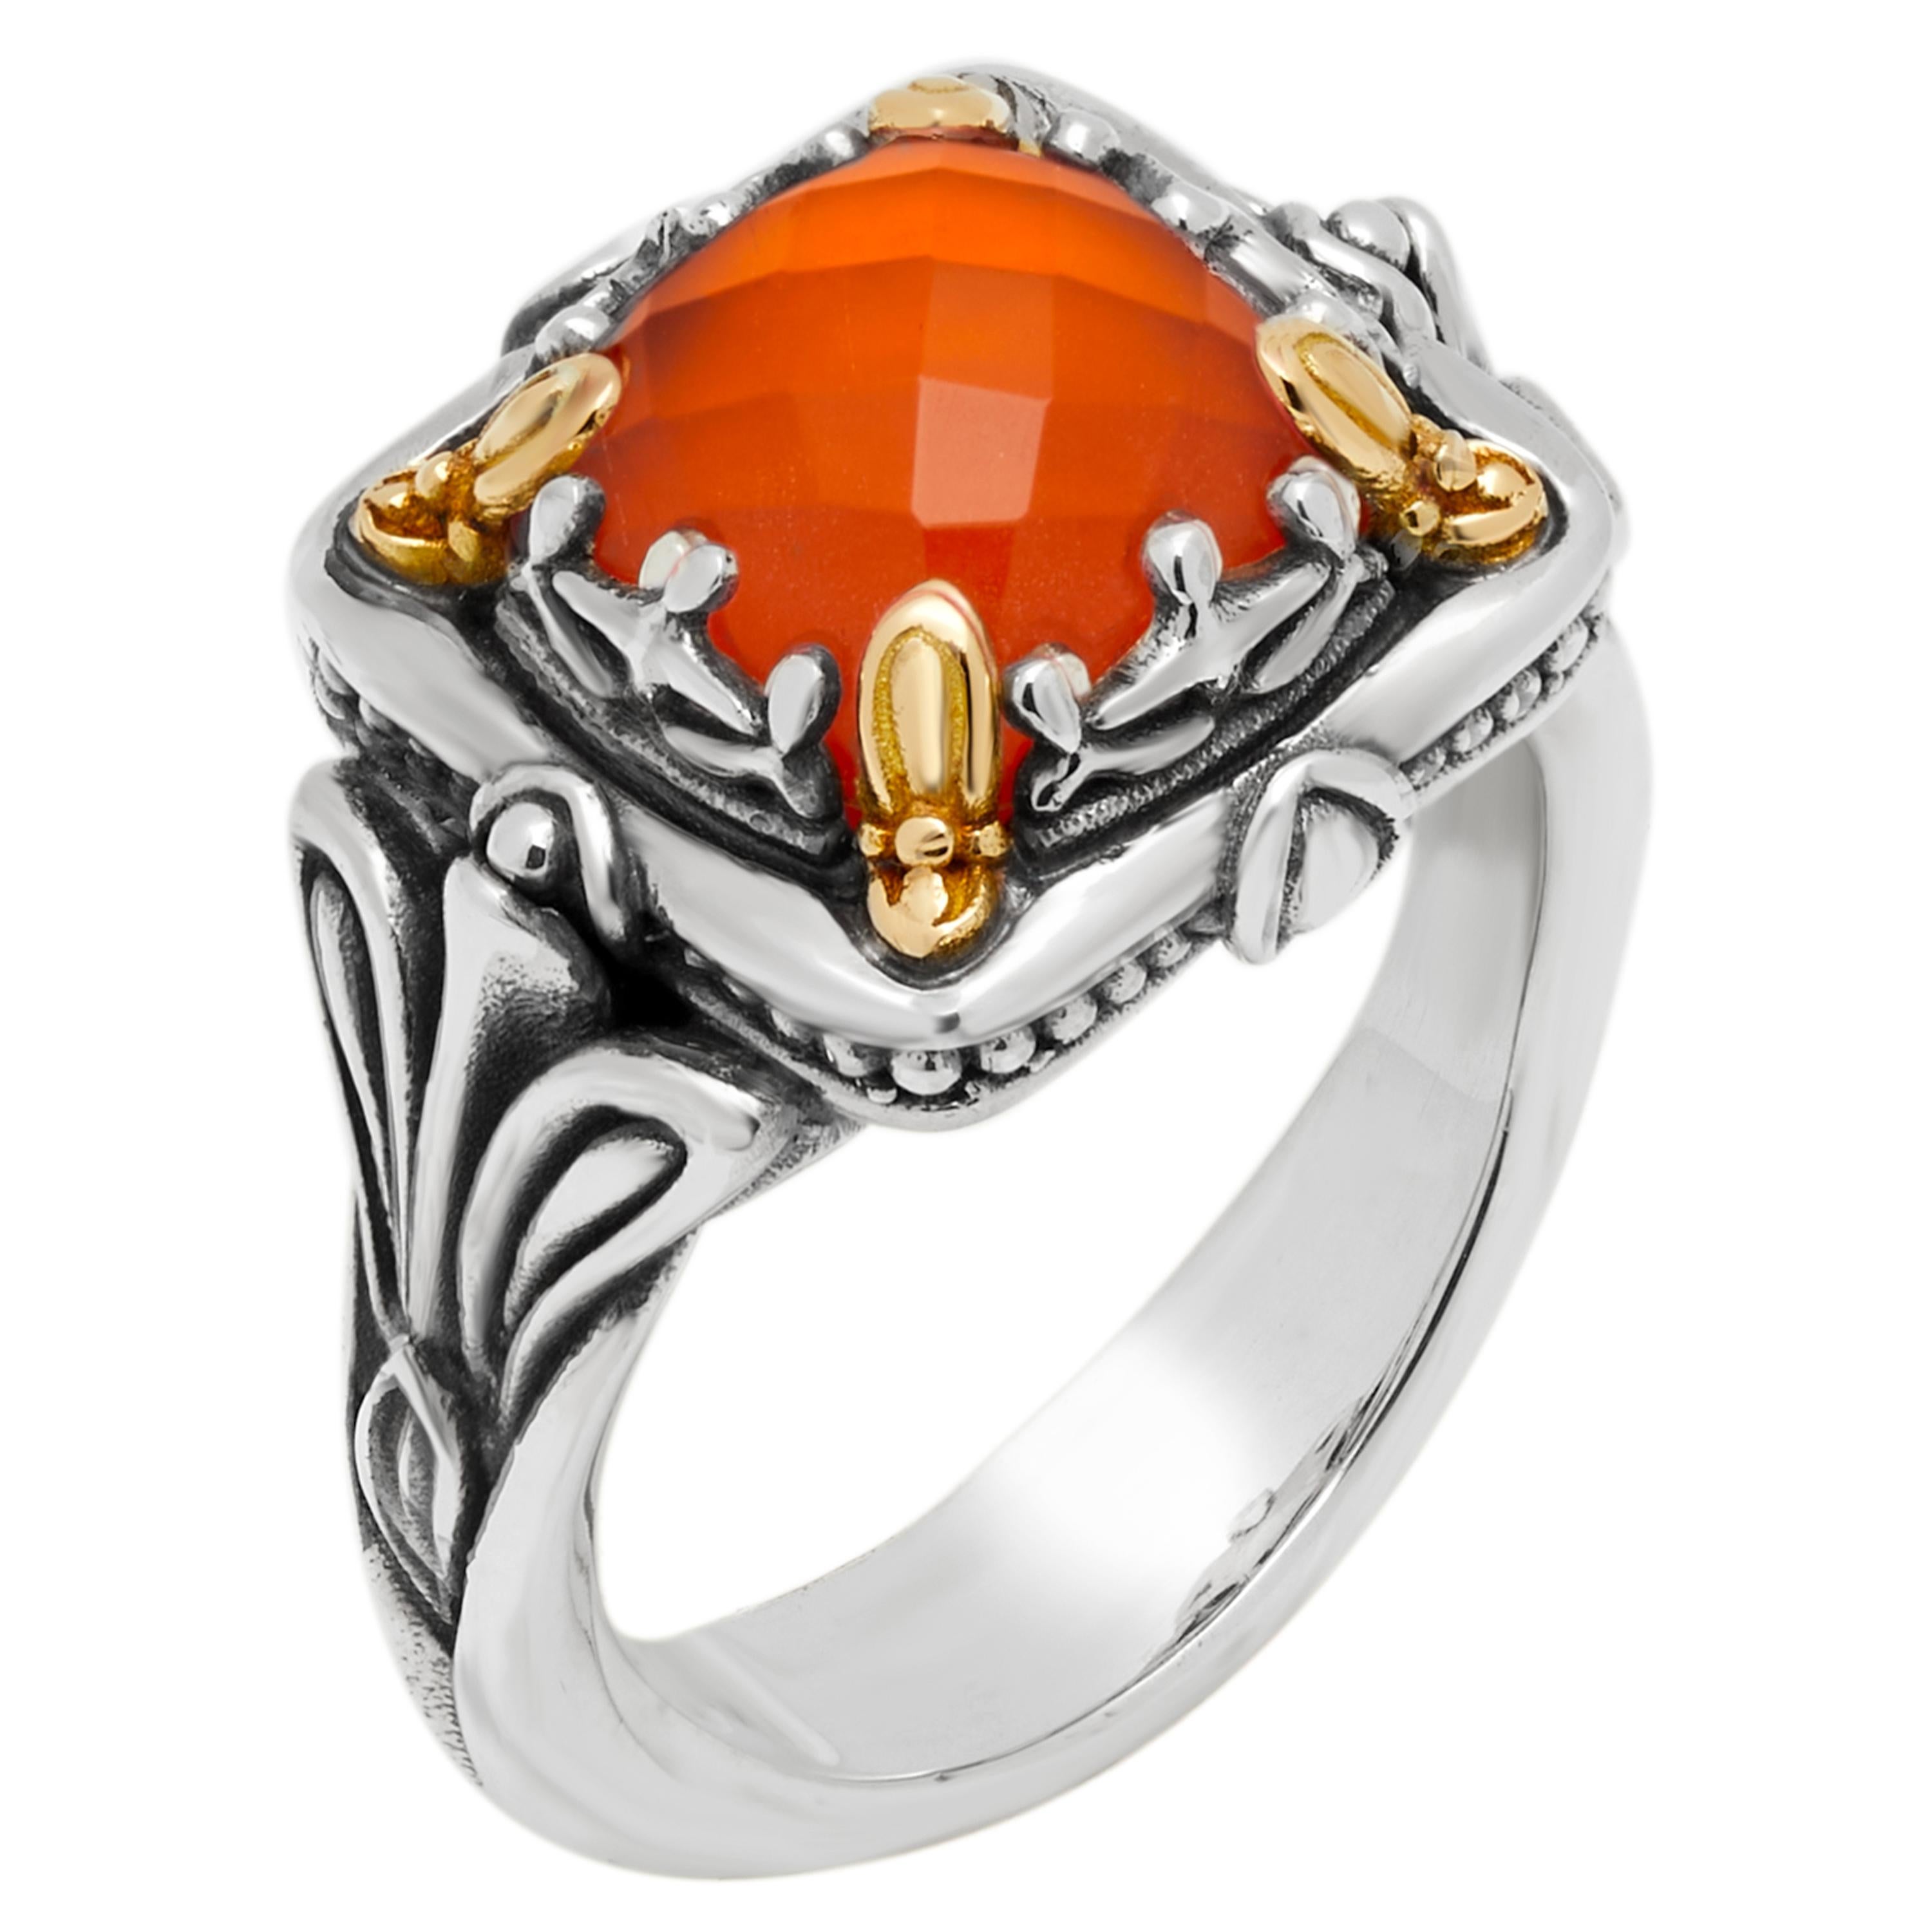 This captivating Konstantino sterling silver statement ring features a faceted carnelian doublet held by 18K yellow gold prongs. The band width is 4.85mm. The ring size is 8 (57.0).